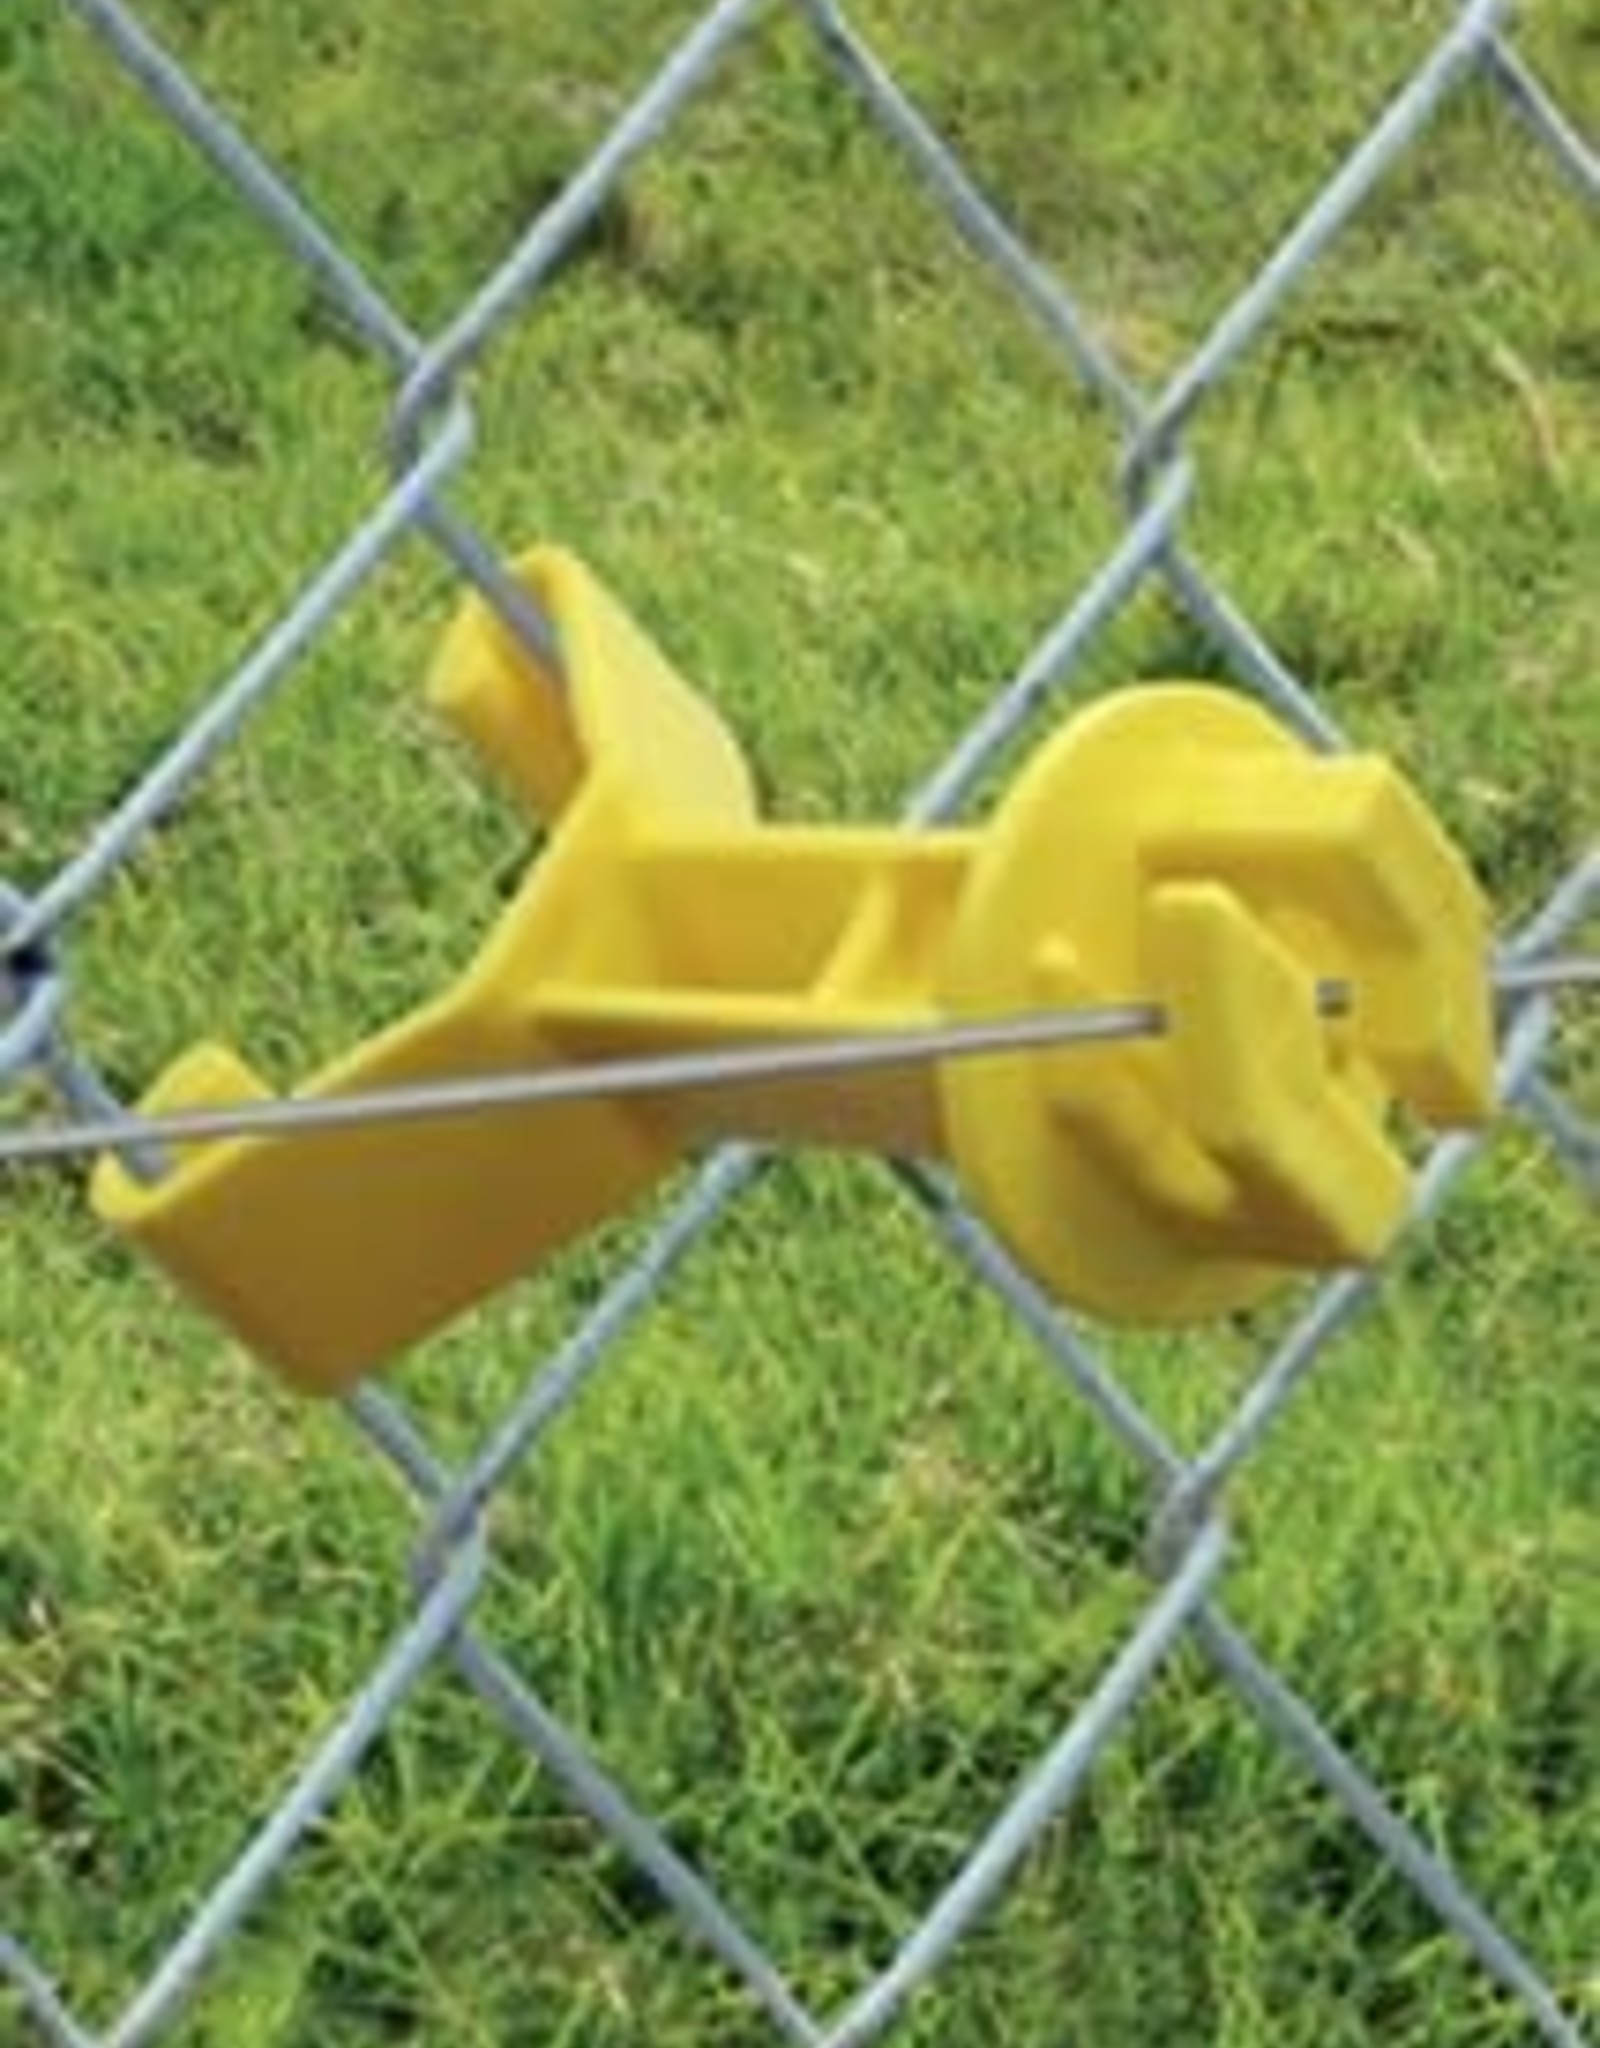 TRU-TEST Electric Fence insulator for chain link 25/pk